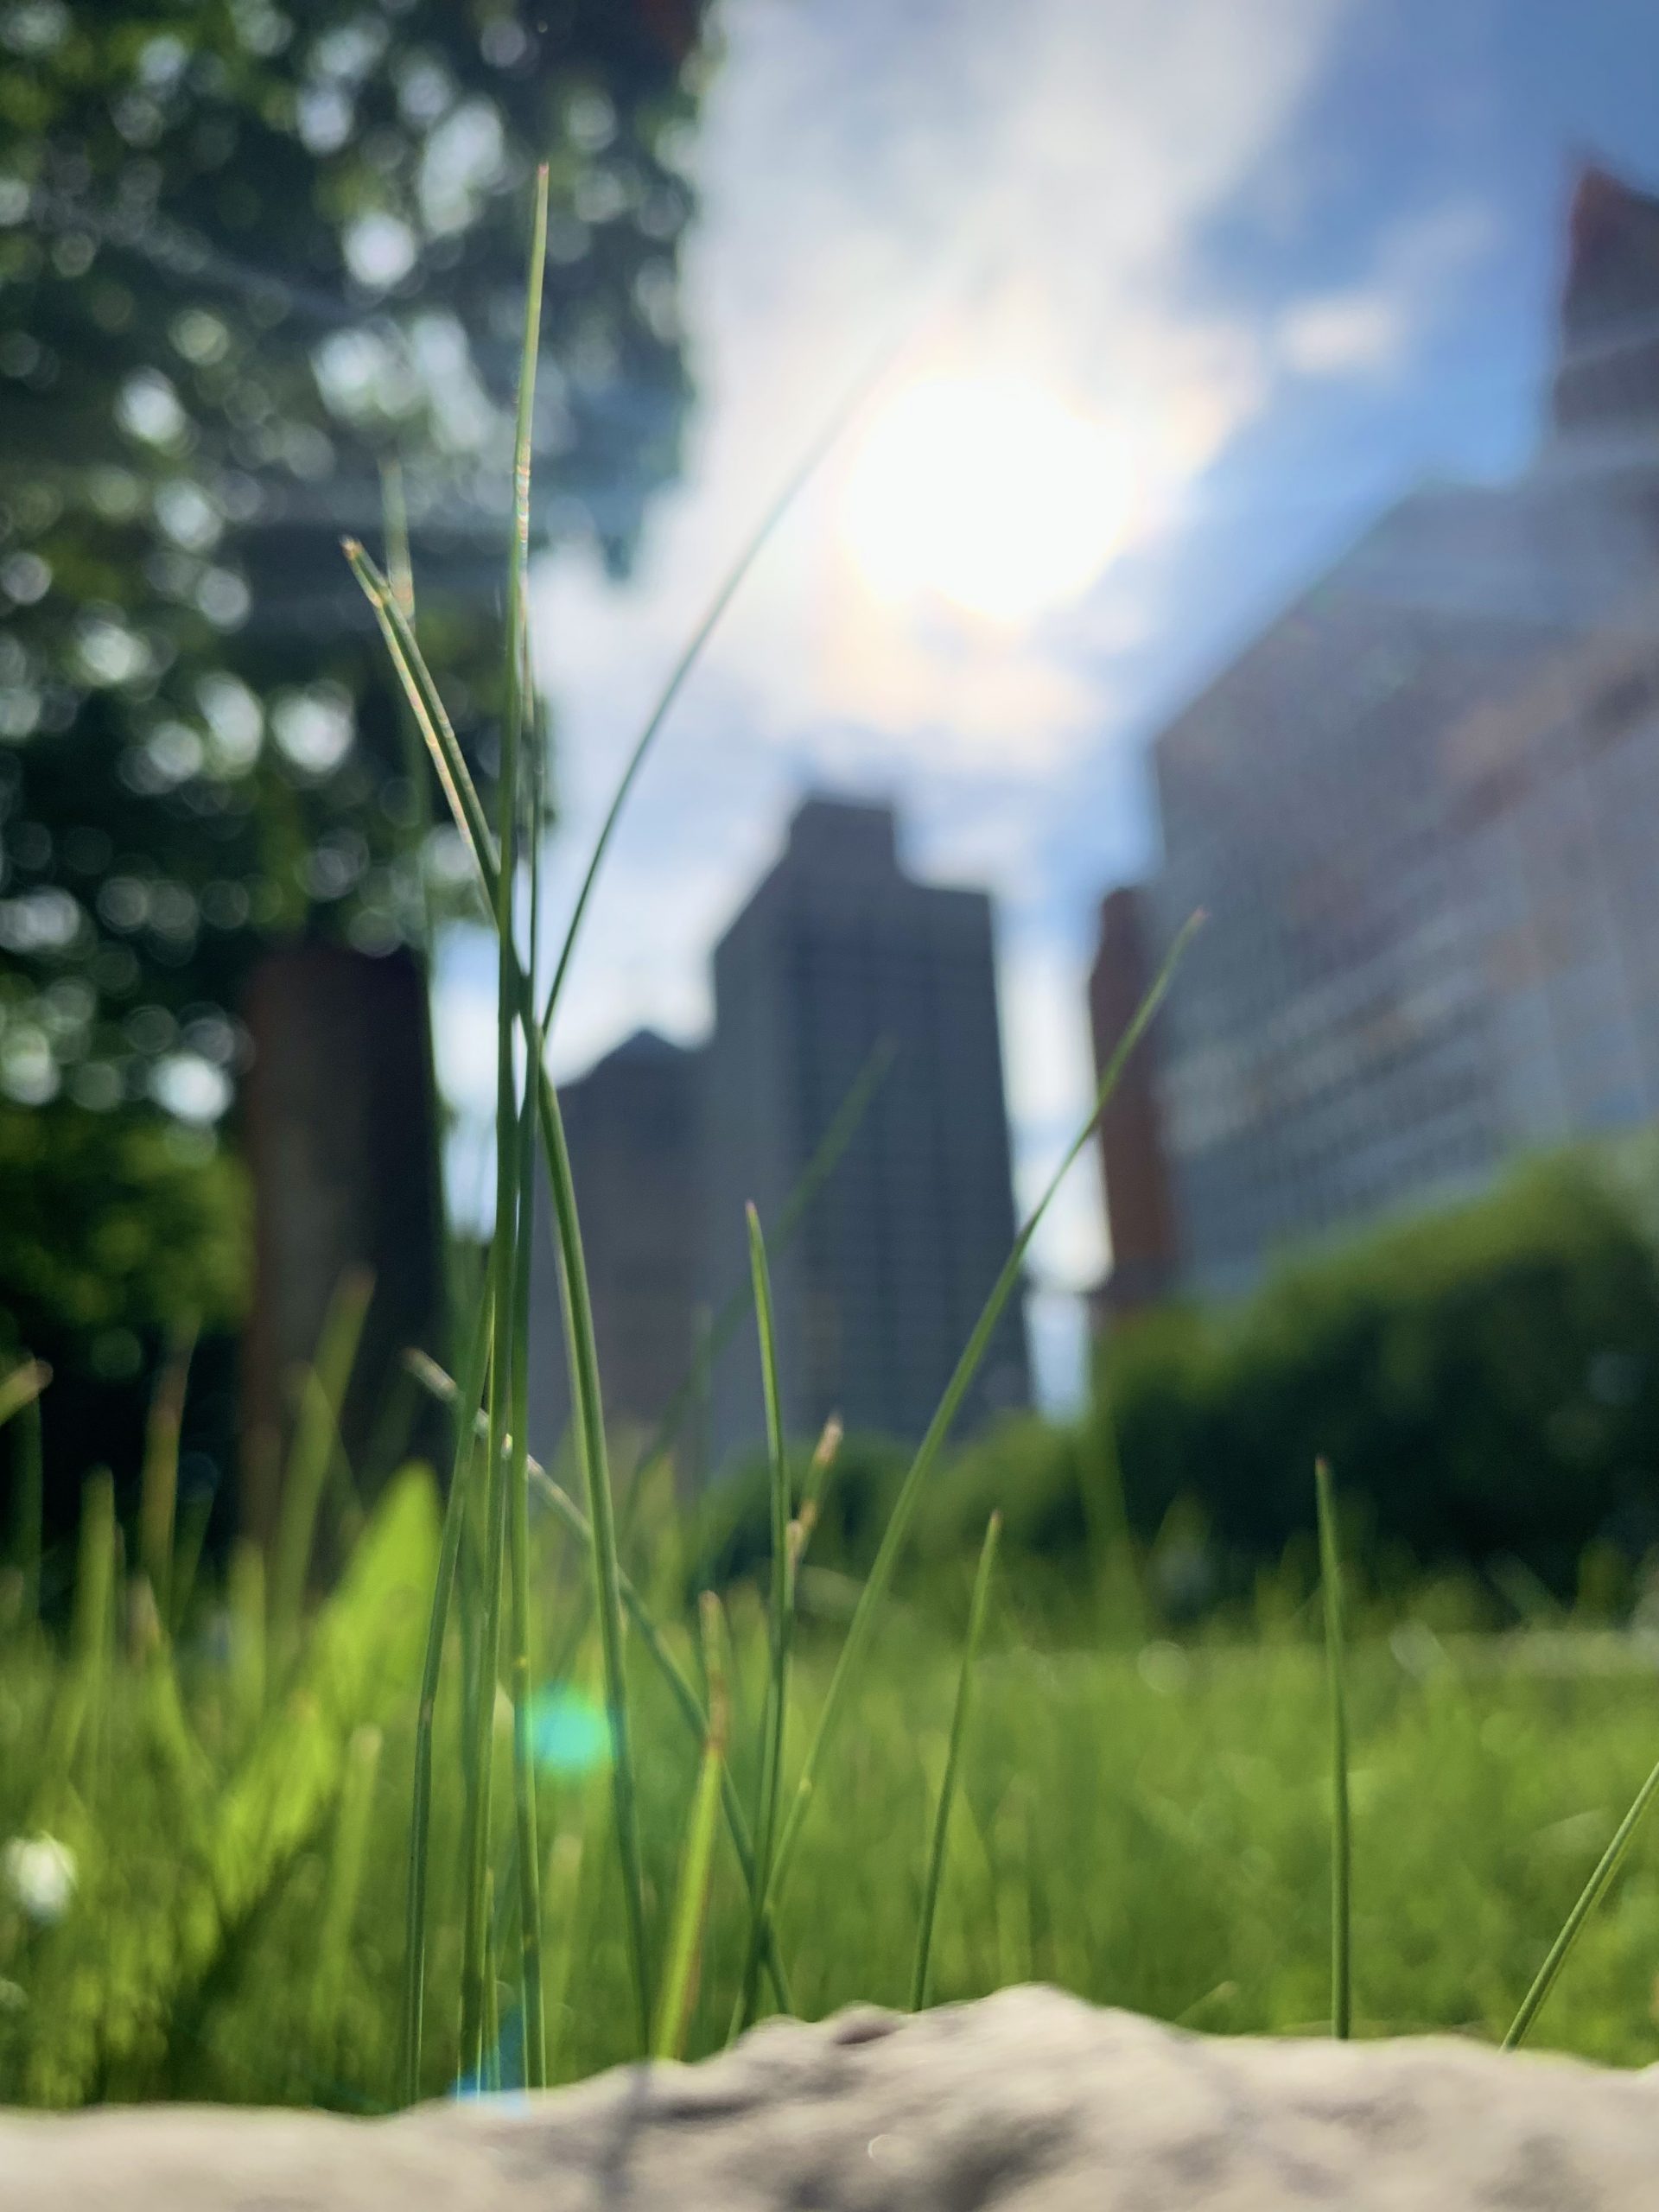 Several green blades of grass fill the frame, with Detroit skyscrapers behind.